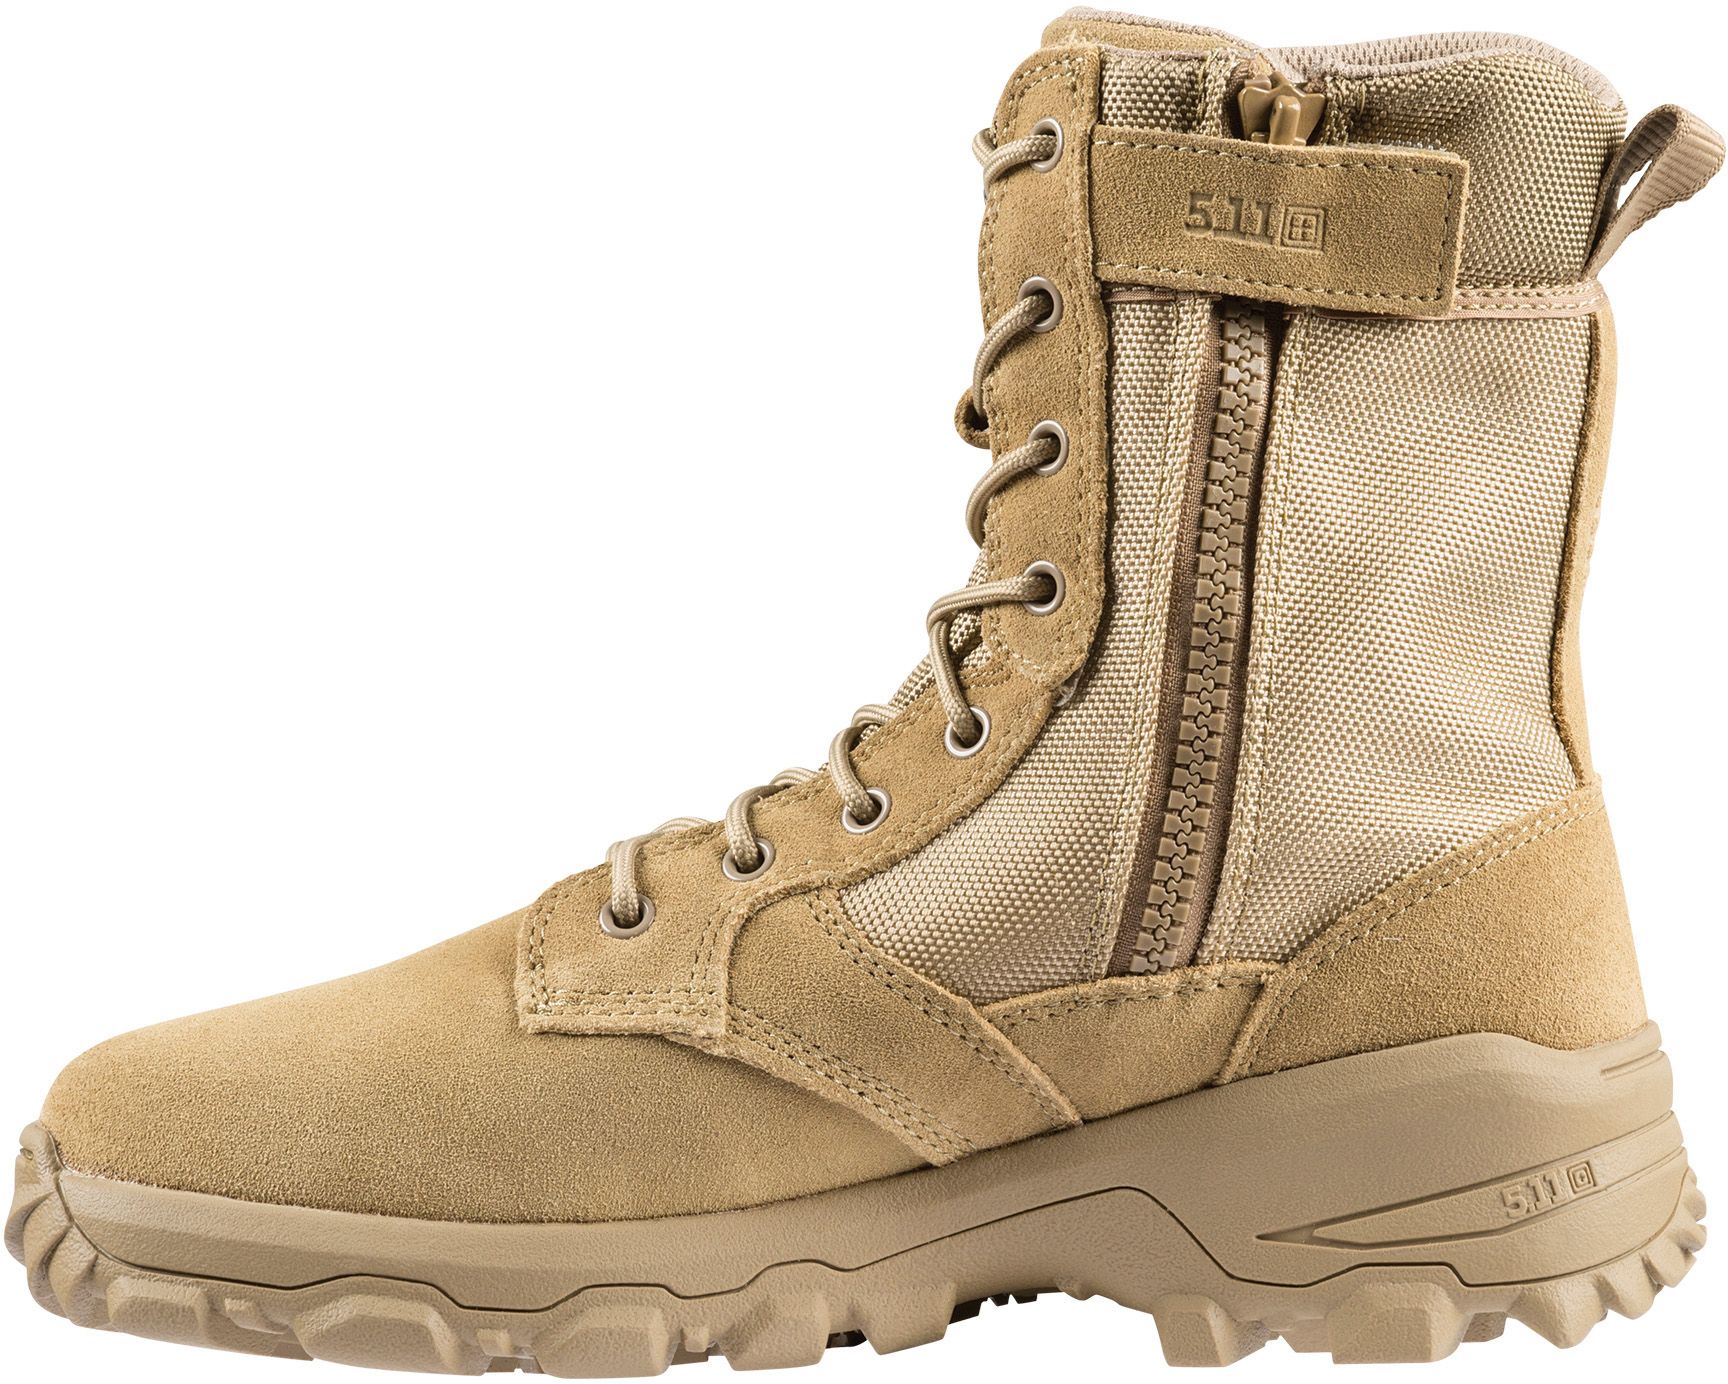 5.11 tactical boots near me